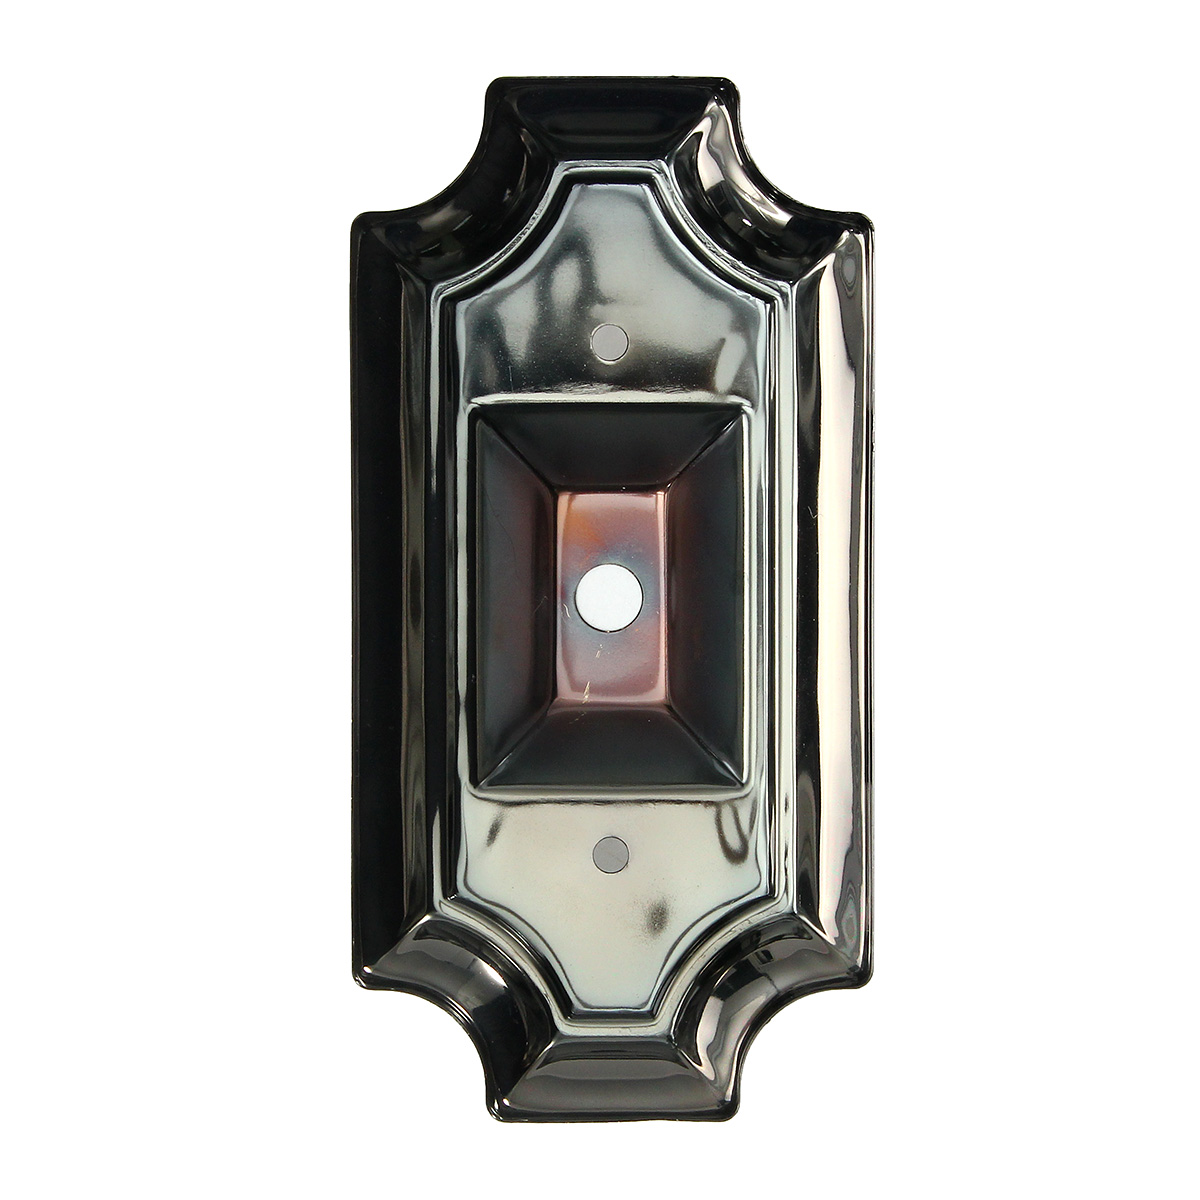 Retro-Vintage-Rectangle-Style-Sconce-Wall-Lamp-Light-Base-Part-Replacement-Mount-Fixture-1112739-8